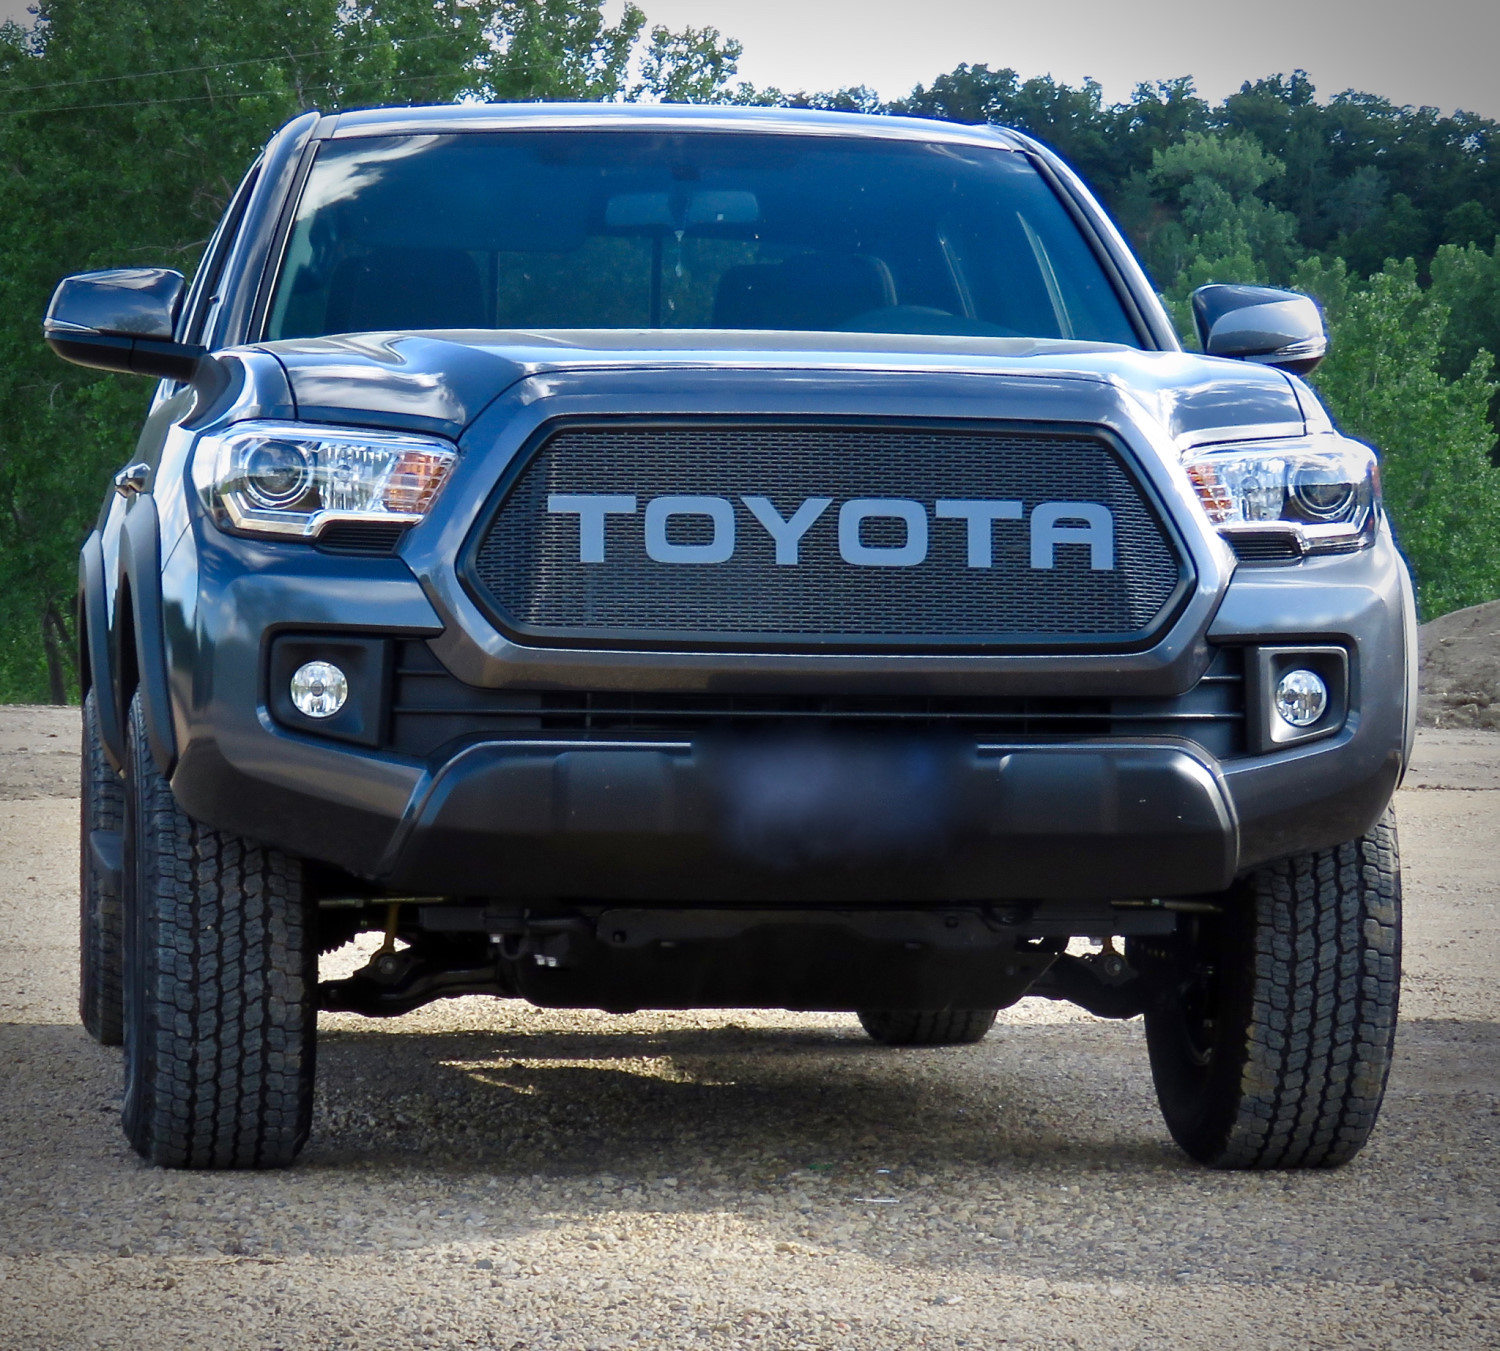 Tacoma Transformation: Black Bezel, Slotted Mesh, and Color-Matched Letters